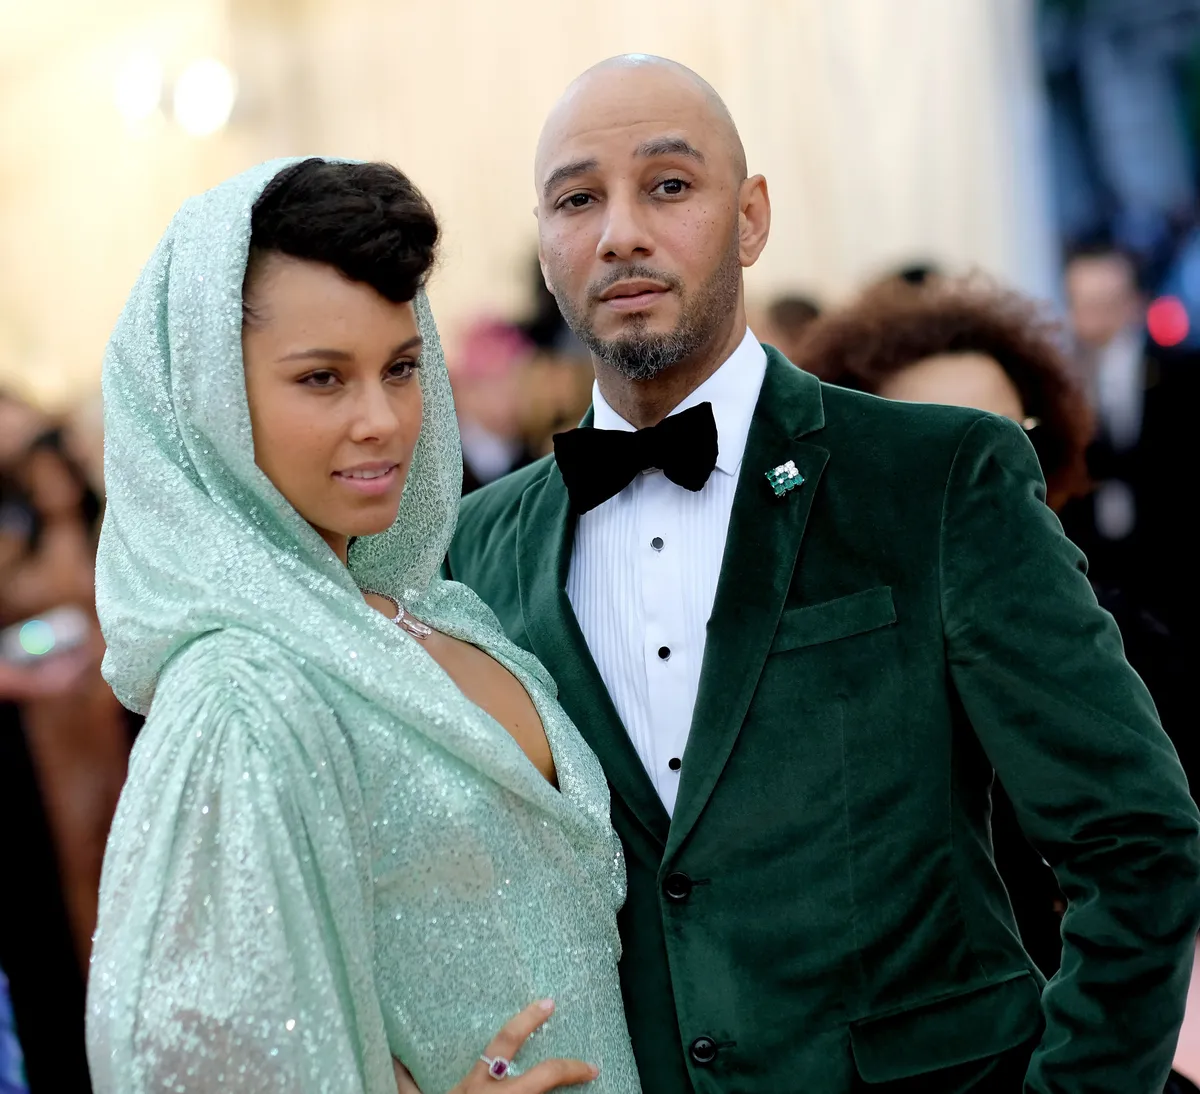 Alicia Keys and Swizz Beatz attends the Met Gala at the Metropolitan Museum of Art in 2019. | Photo: Getty Images